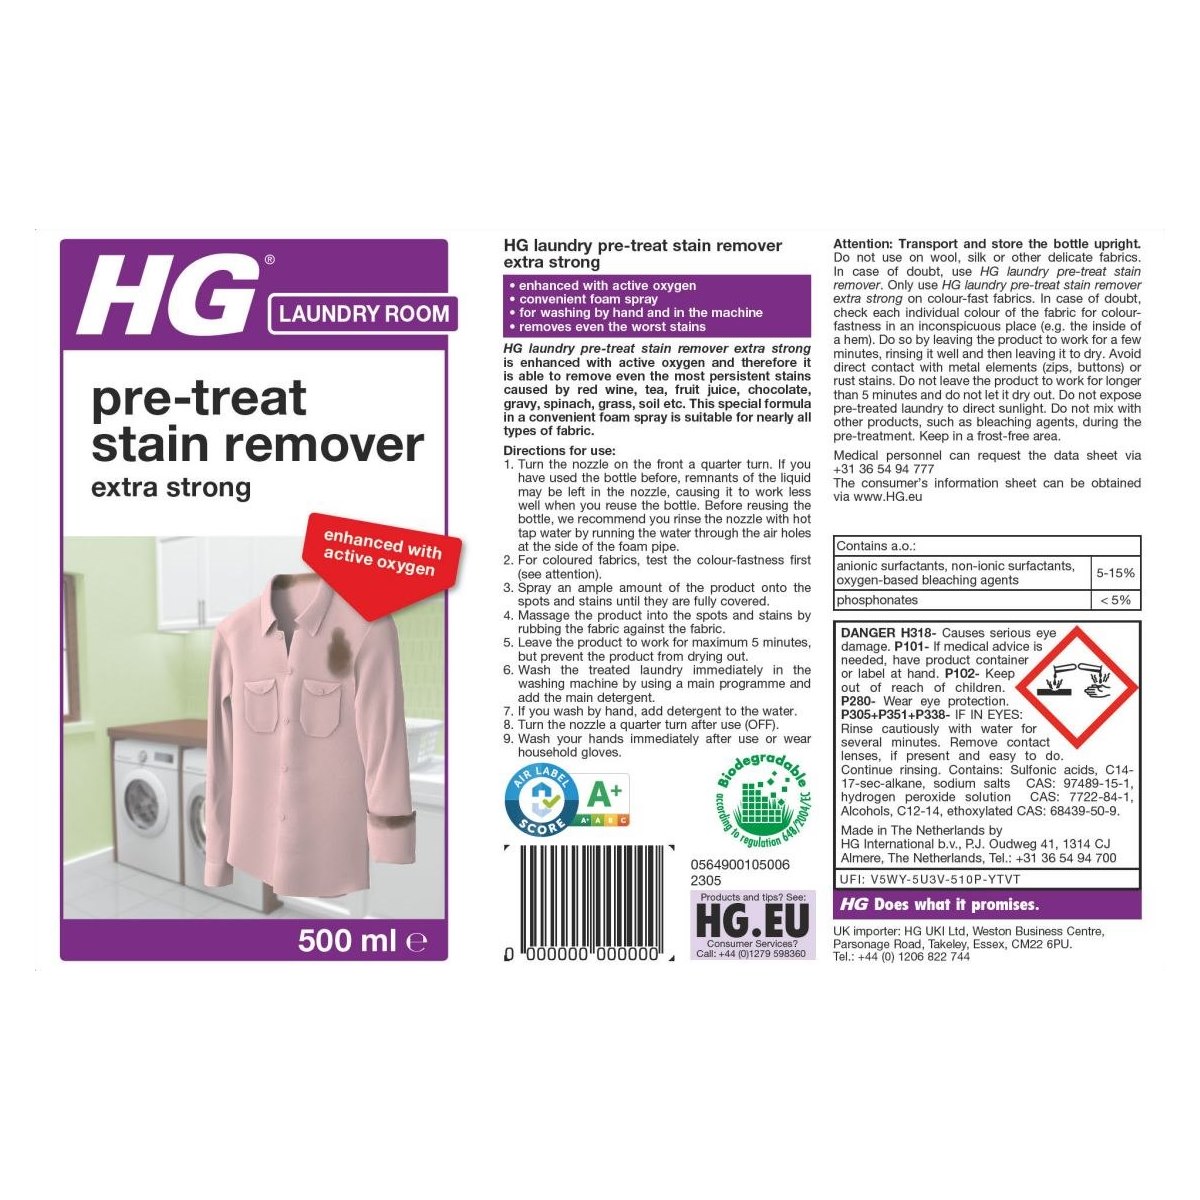 How to use HG Pre Treat Stain Remover Spray Extra Strong